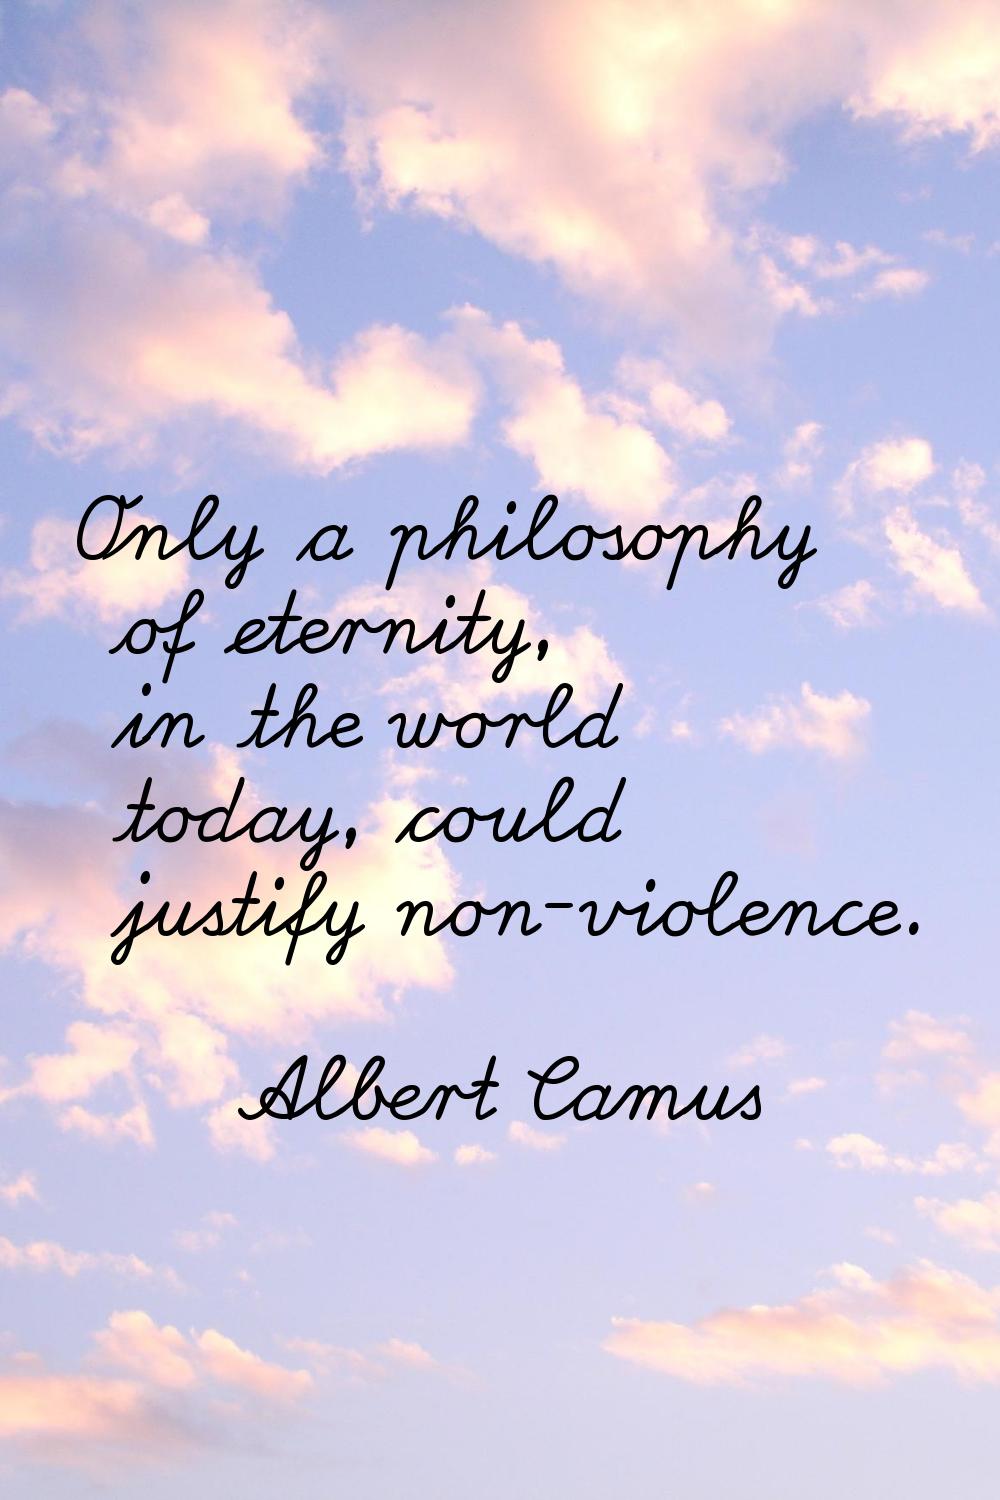 Only a philosophy of eternity, in the world today, could justify non-violence.